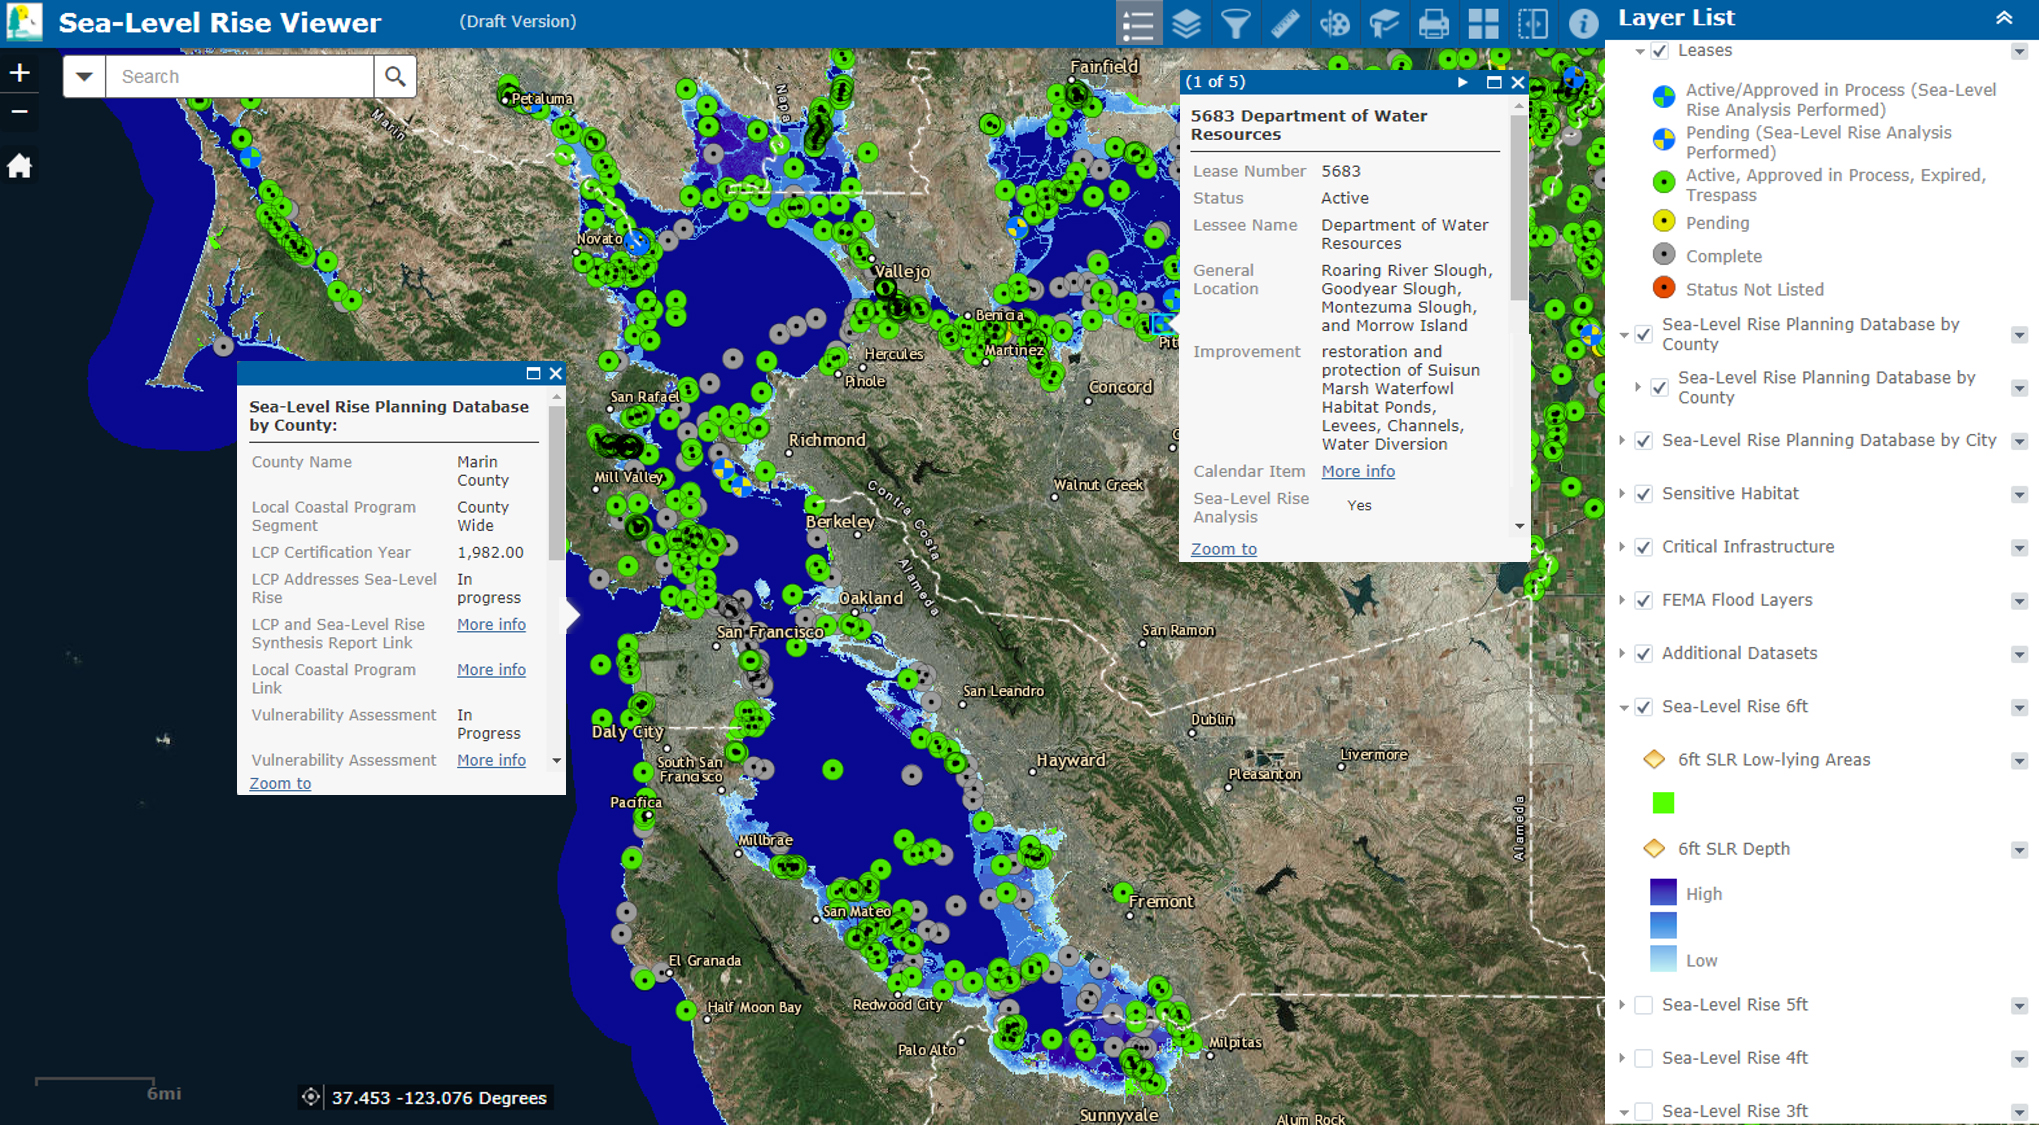 NOAA’s Sea Level Rise Viewer showing protected areas at risk of inundation along the California coastline